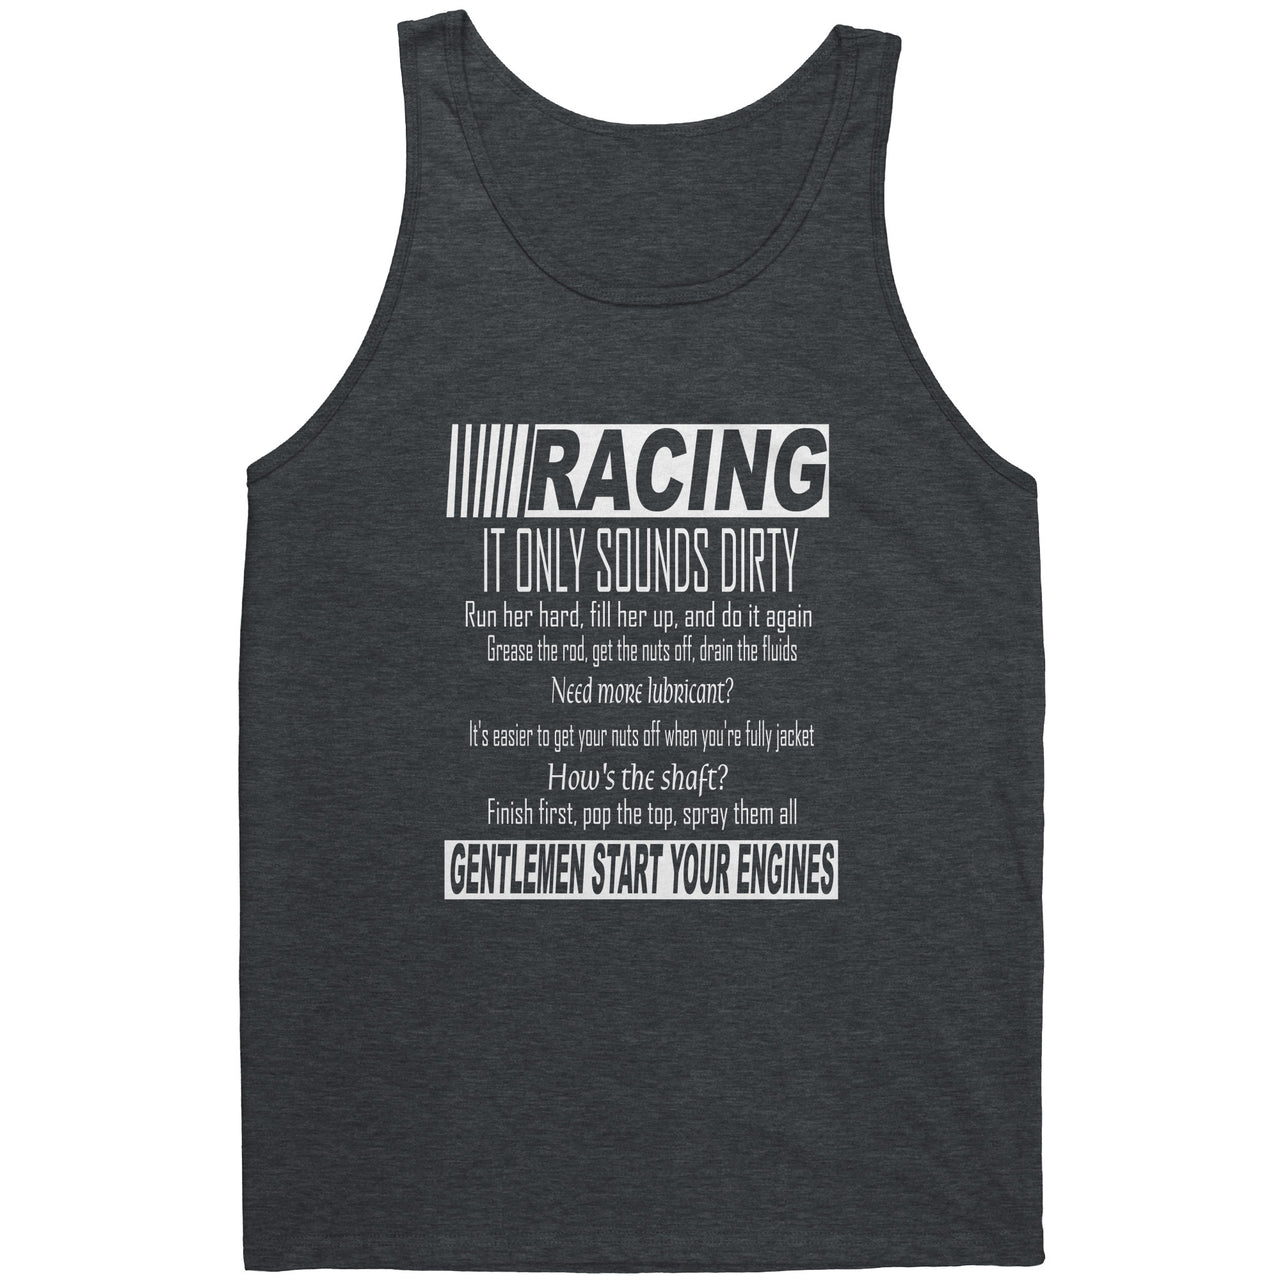 Racing It only sounds dirty Tanks/Hoodies WV